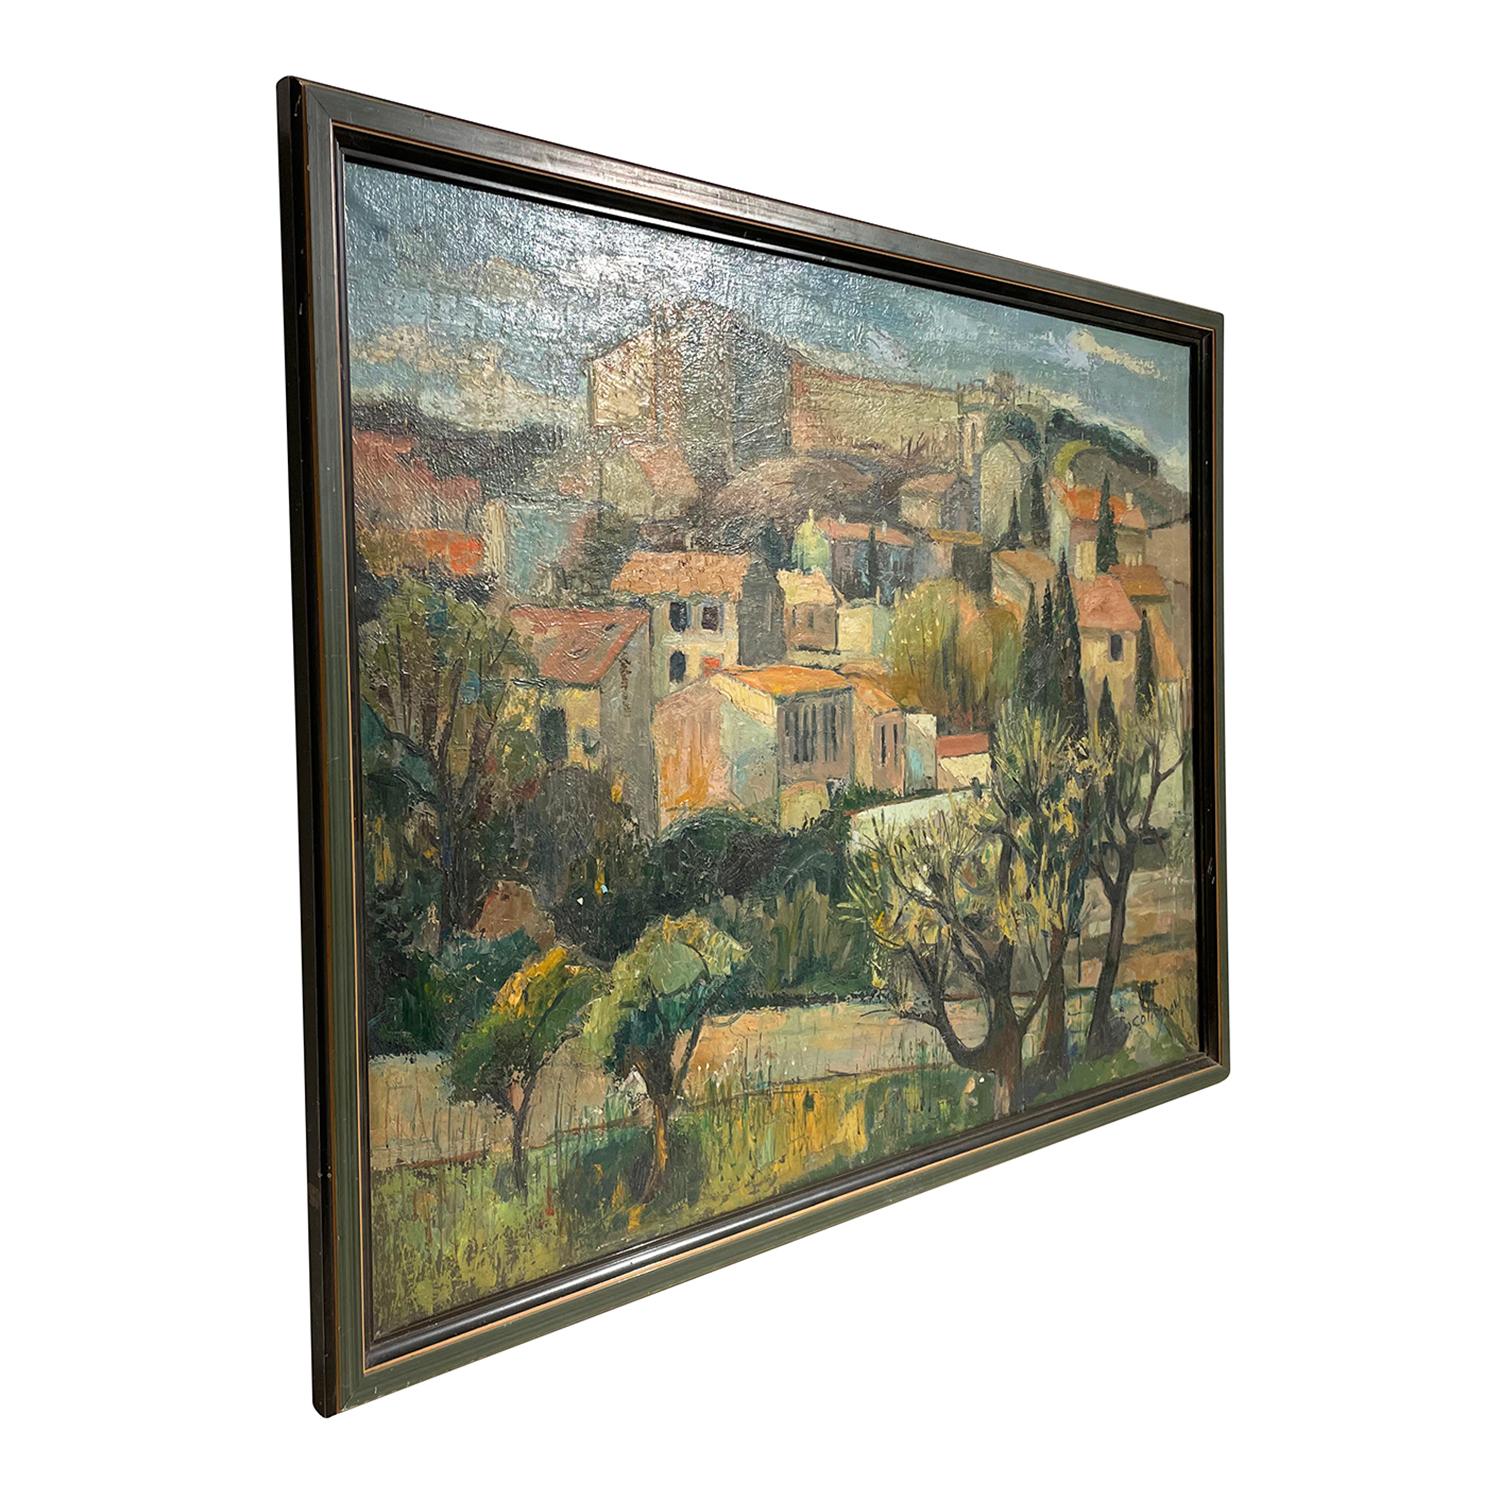 A dark-green, yellow antique French Provencal landscape oil on canvas painting, portraying a sunny day in a small town, most likely in Provence, painted by Eugène Colignon in a handcrafted original wooden frame, in good condition. The large scenery